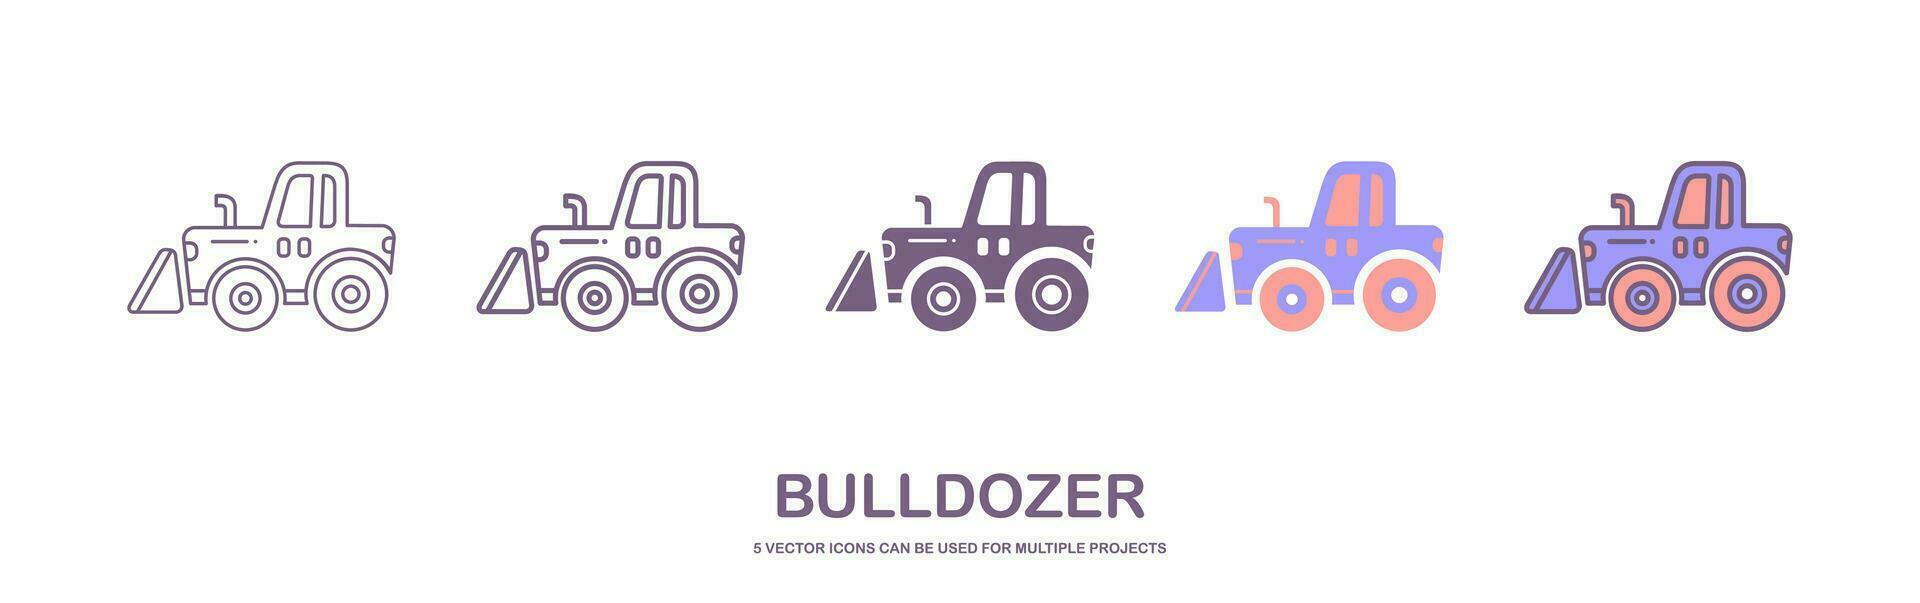 Bulldozer icon. Heavy tracked tractor with blade. Vector simple flat graphic illustration. The isolated object on a white background. Isolated on white background.